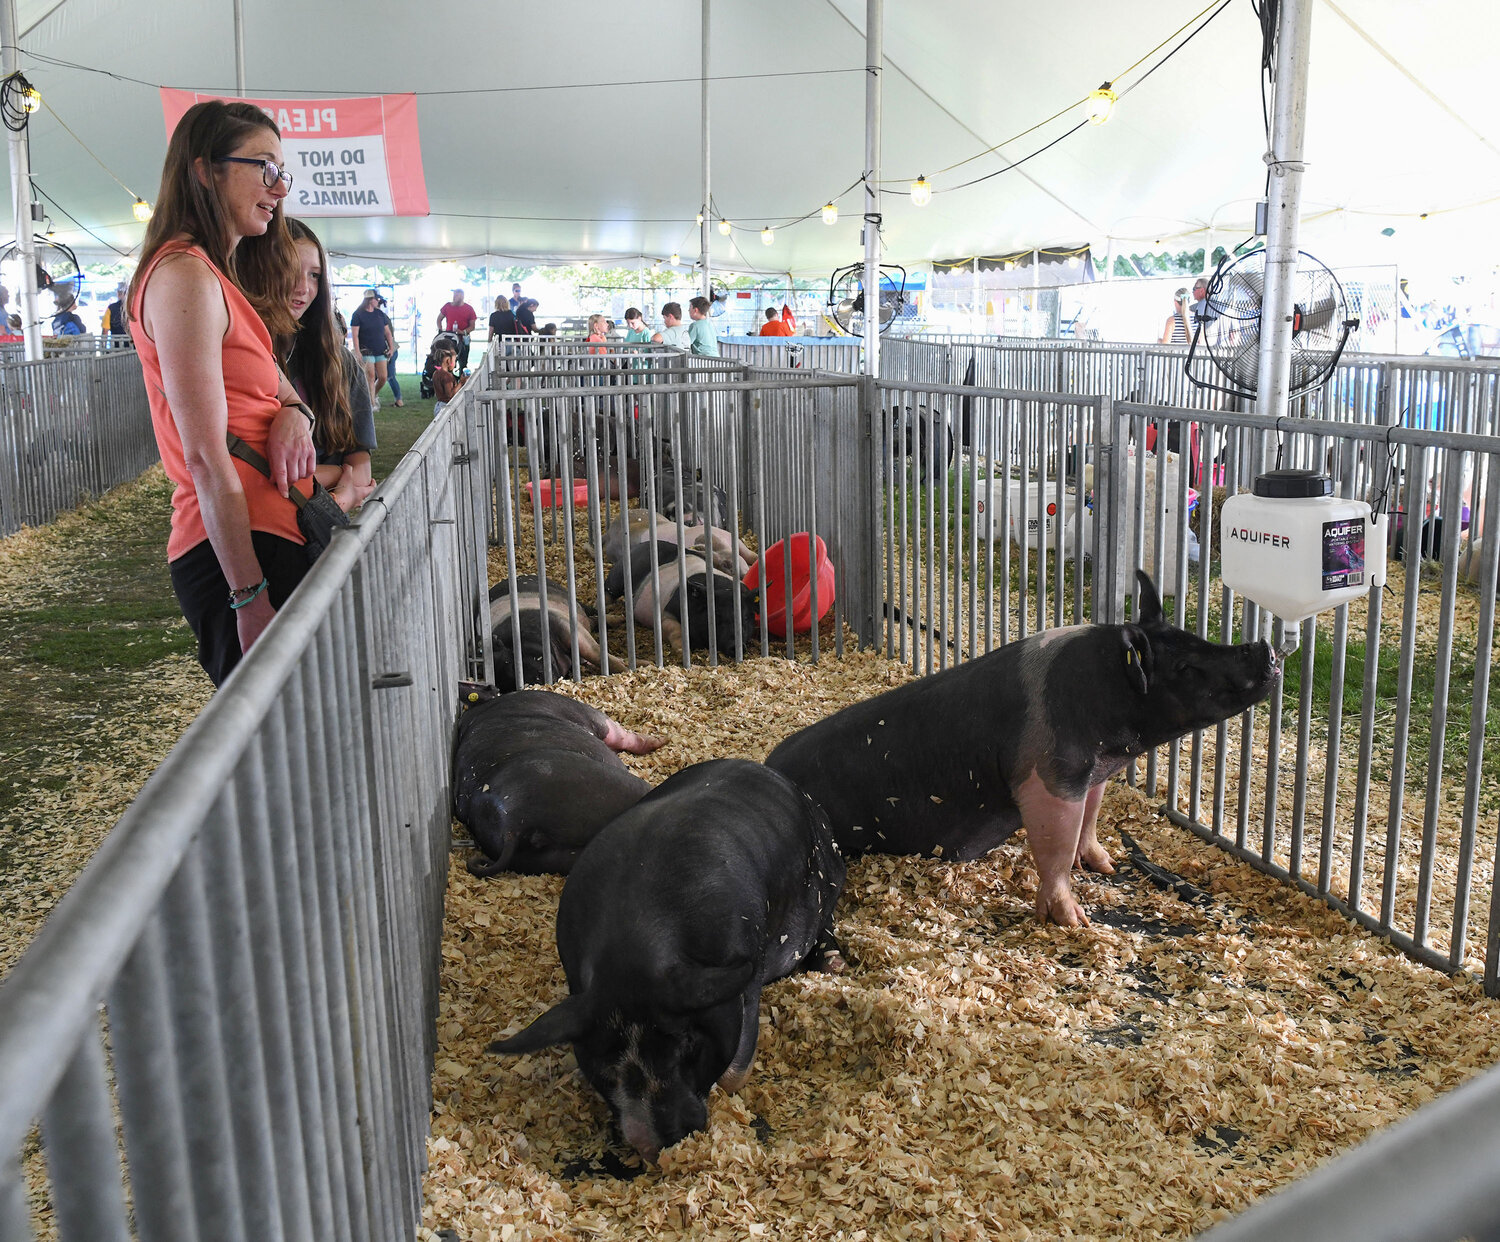 Fairgoers look at the animals during the annual Wicomico County Fair this past weekend.